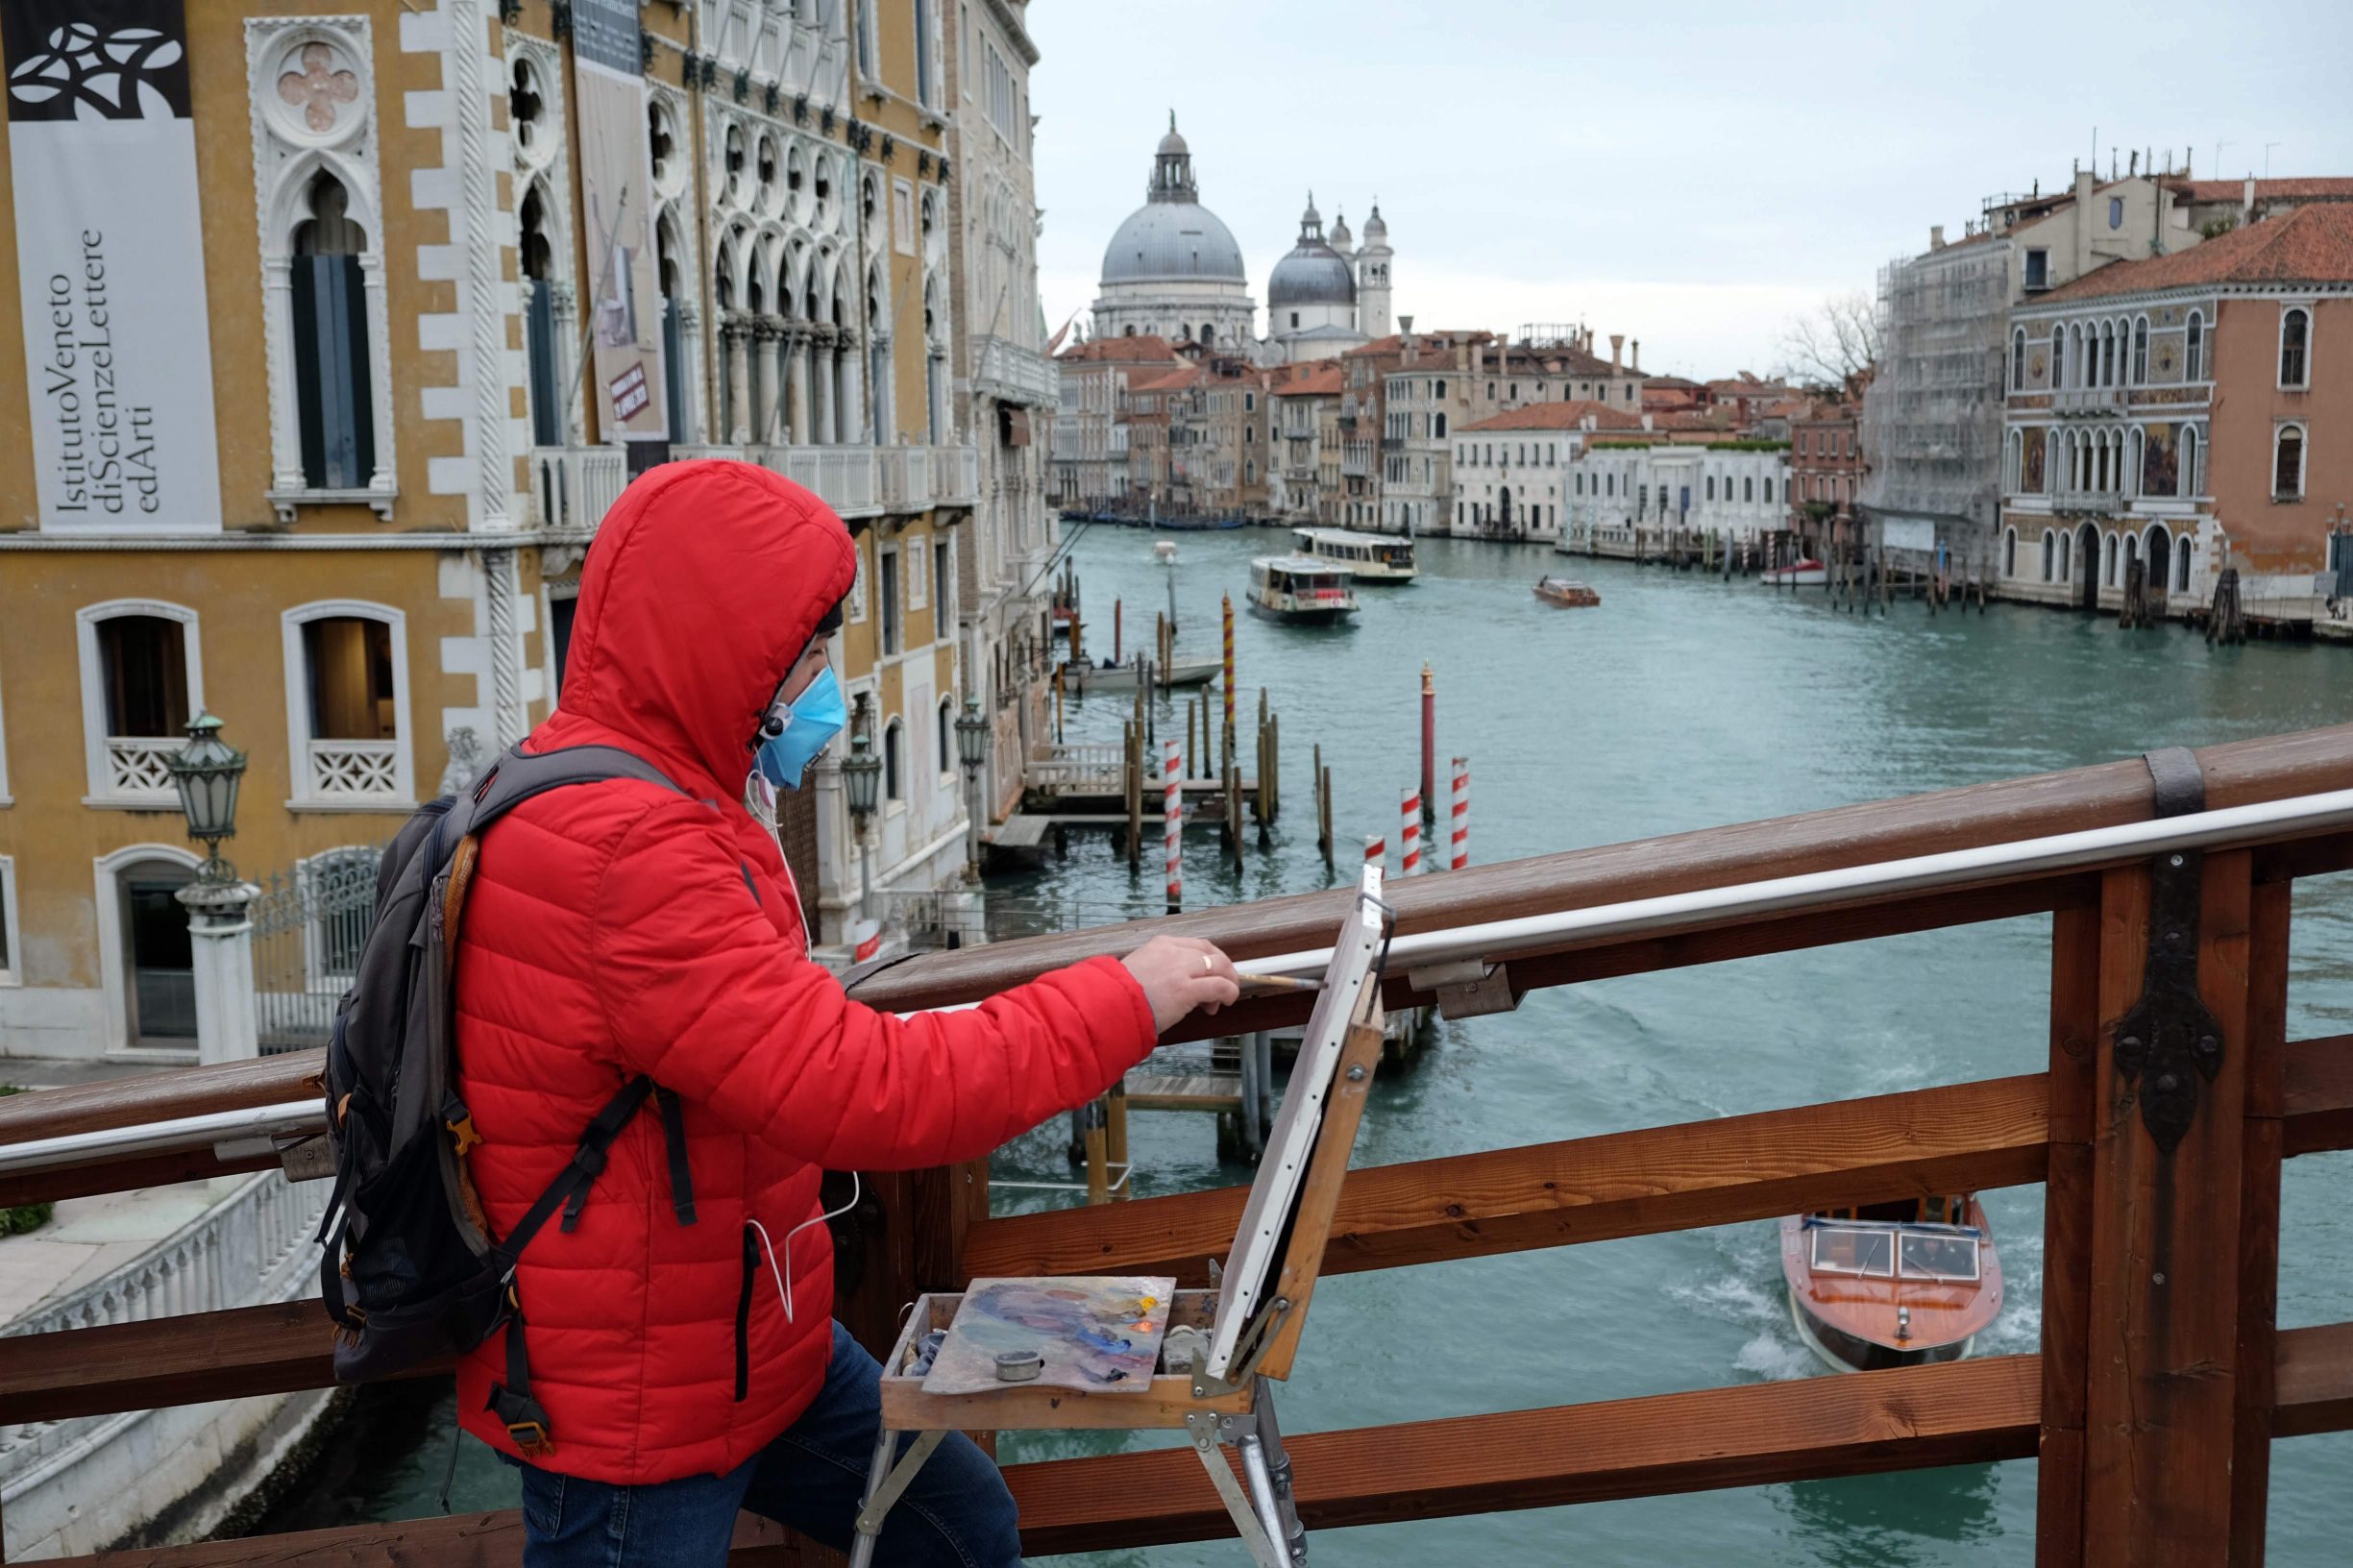 A man wearing a protective mask paint on Accademia bridge in Venice on March 8, 2020 on March 8, 2020 in Venice shows the Grand Canal empty of boats with the Salute Church on the left. - A quarter of the Italian population was locked down on March 8, 2020 as the government takes drastic steps to stop the spread of the deadly new coronavirus that is sweeping the globe, with Latin America recording its first fatality. (Photo by ANDREA PATTARO / AFP)